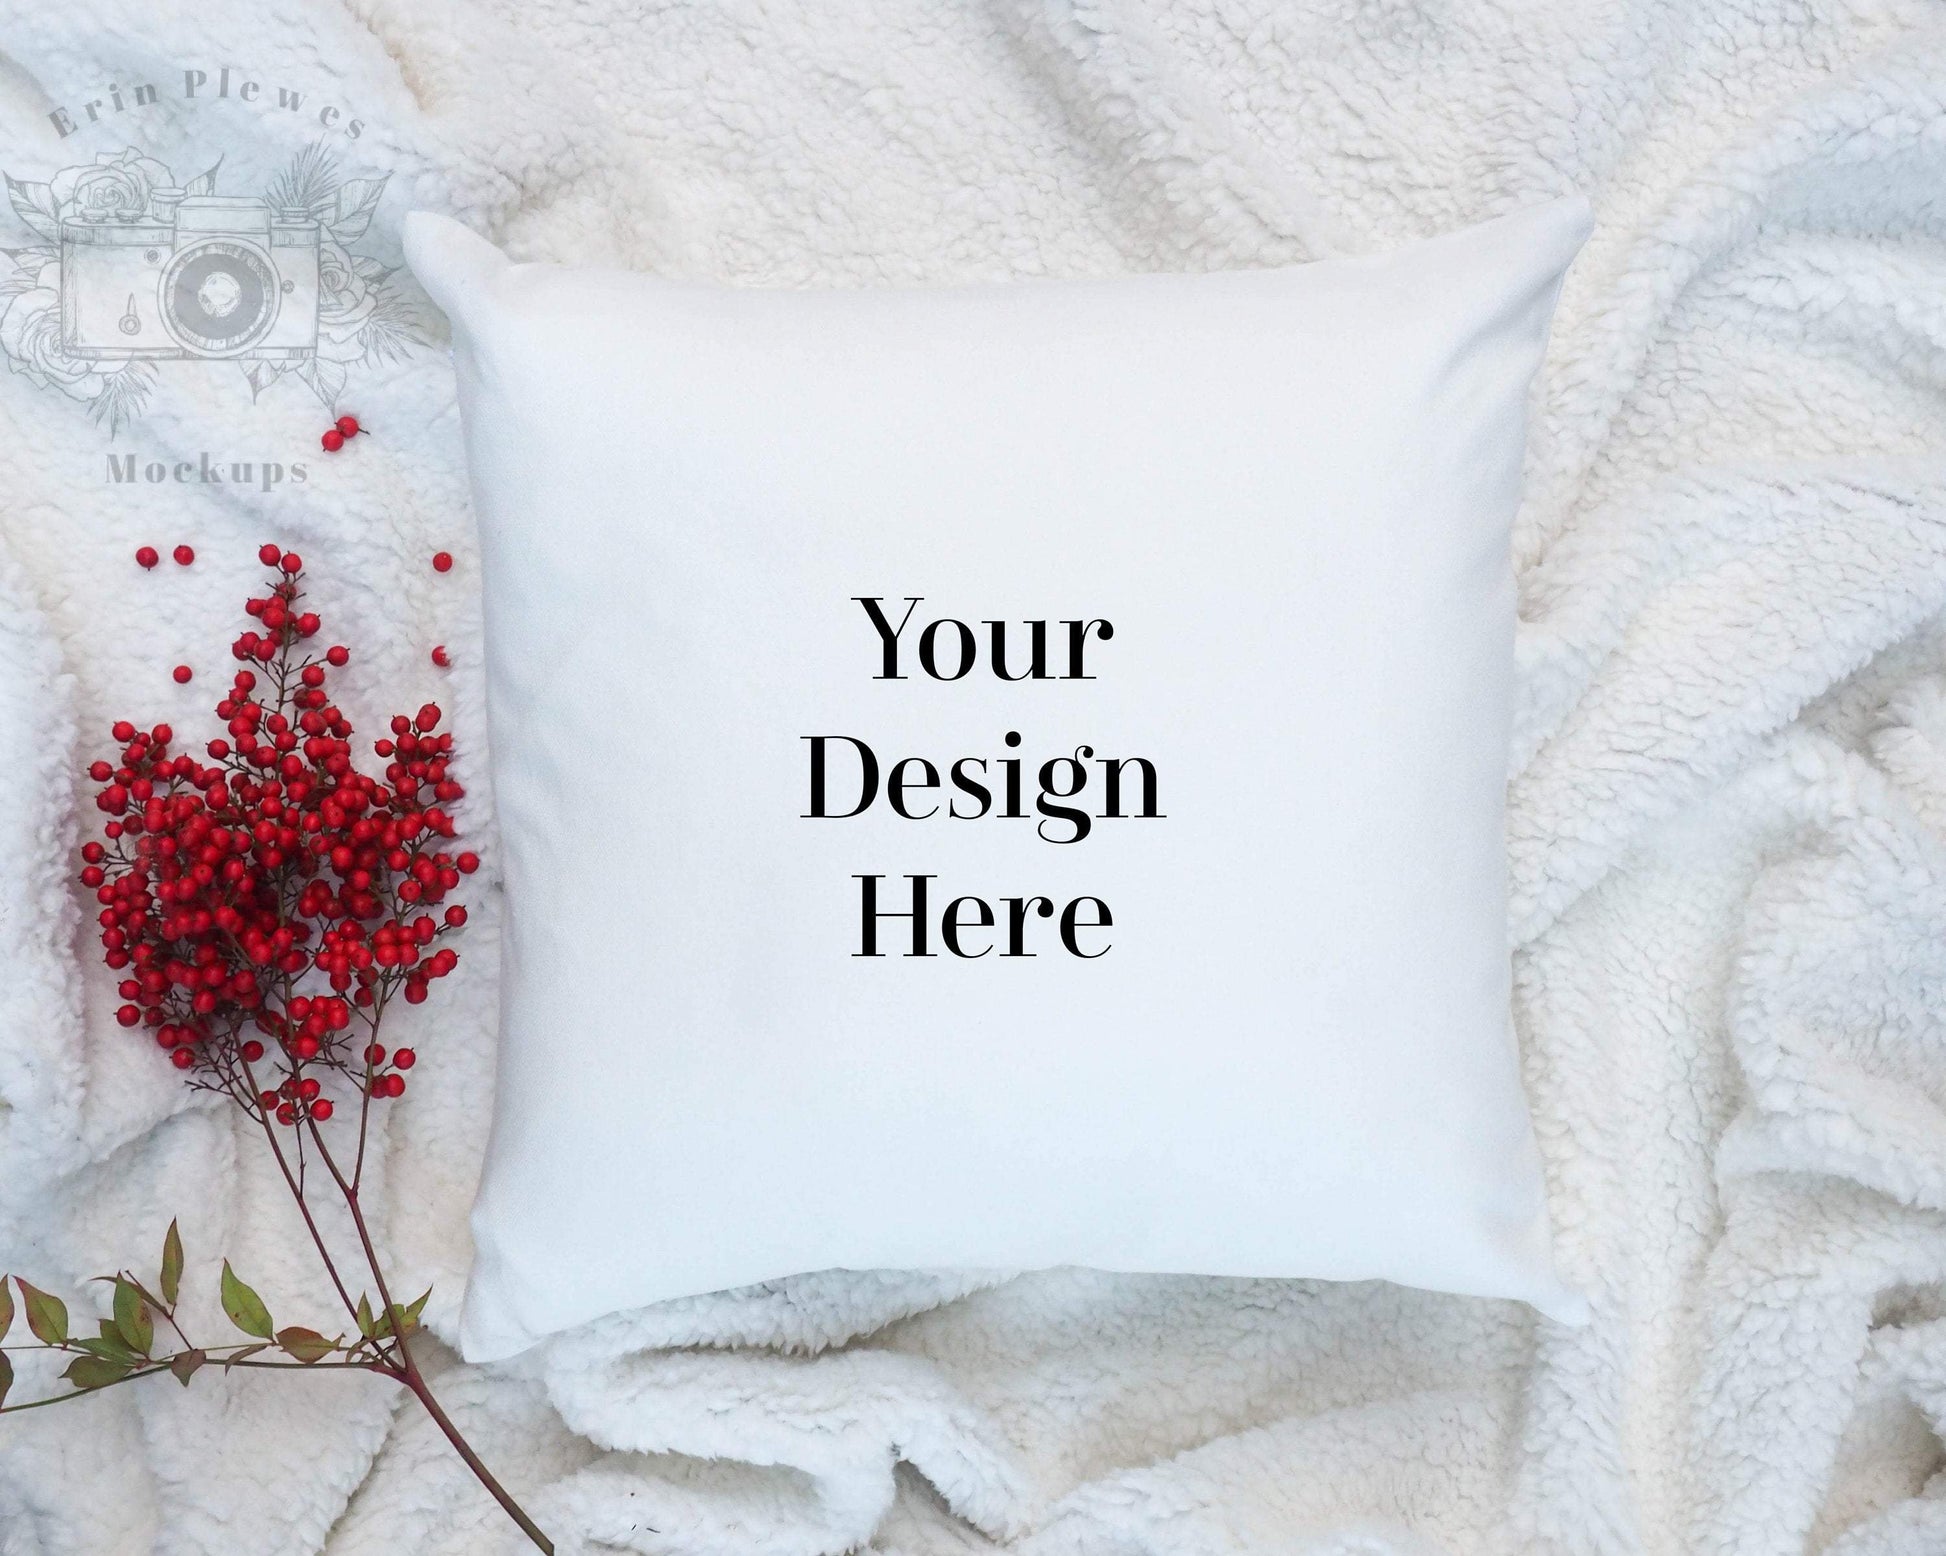 Erin Plewes Mockups Pillow Mockup, White pillow mockup for lifestyle stock photography, square pillow mock up jpeg digital download